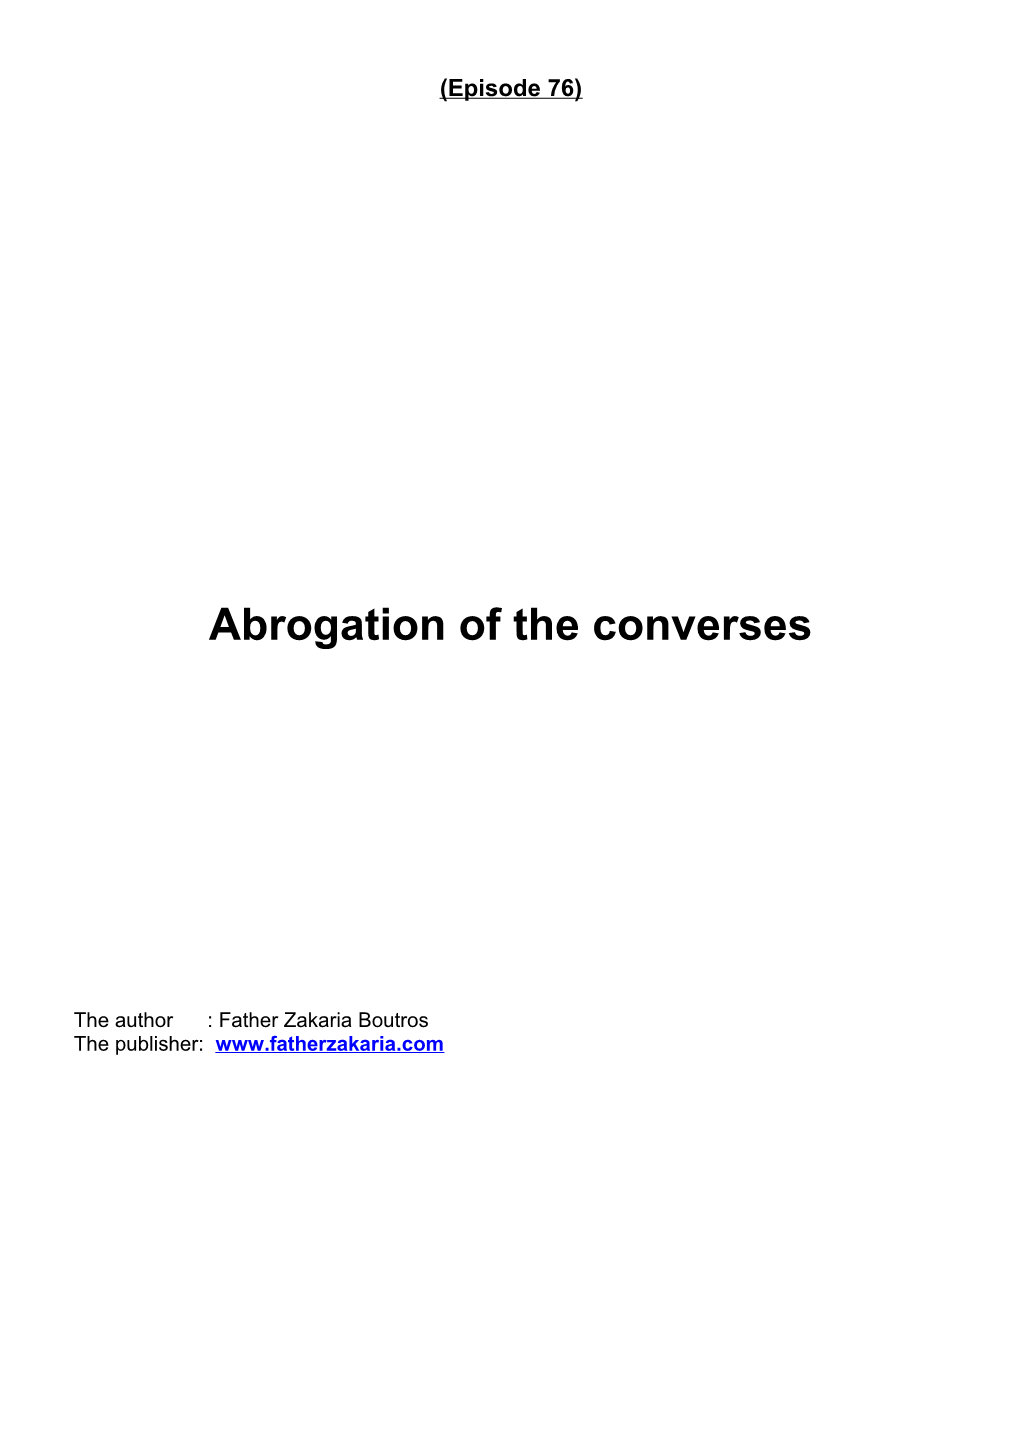 Abrogation of the Converses